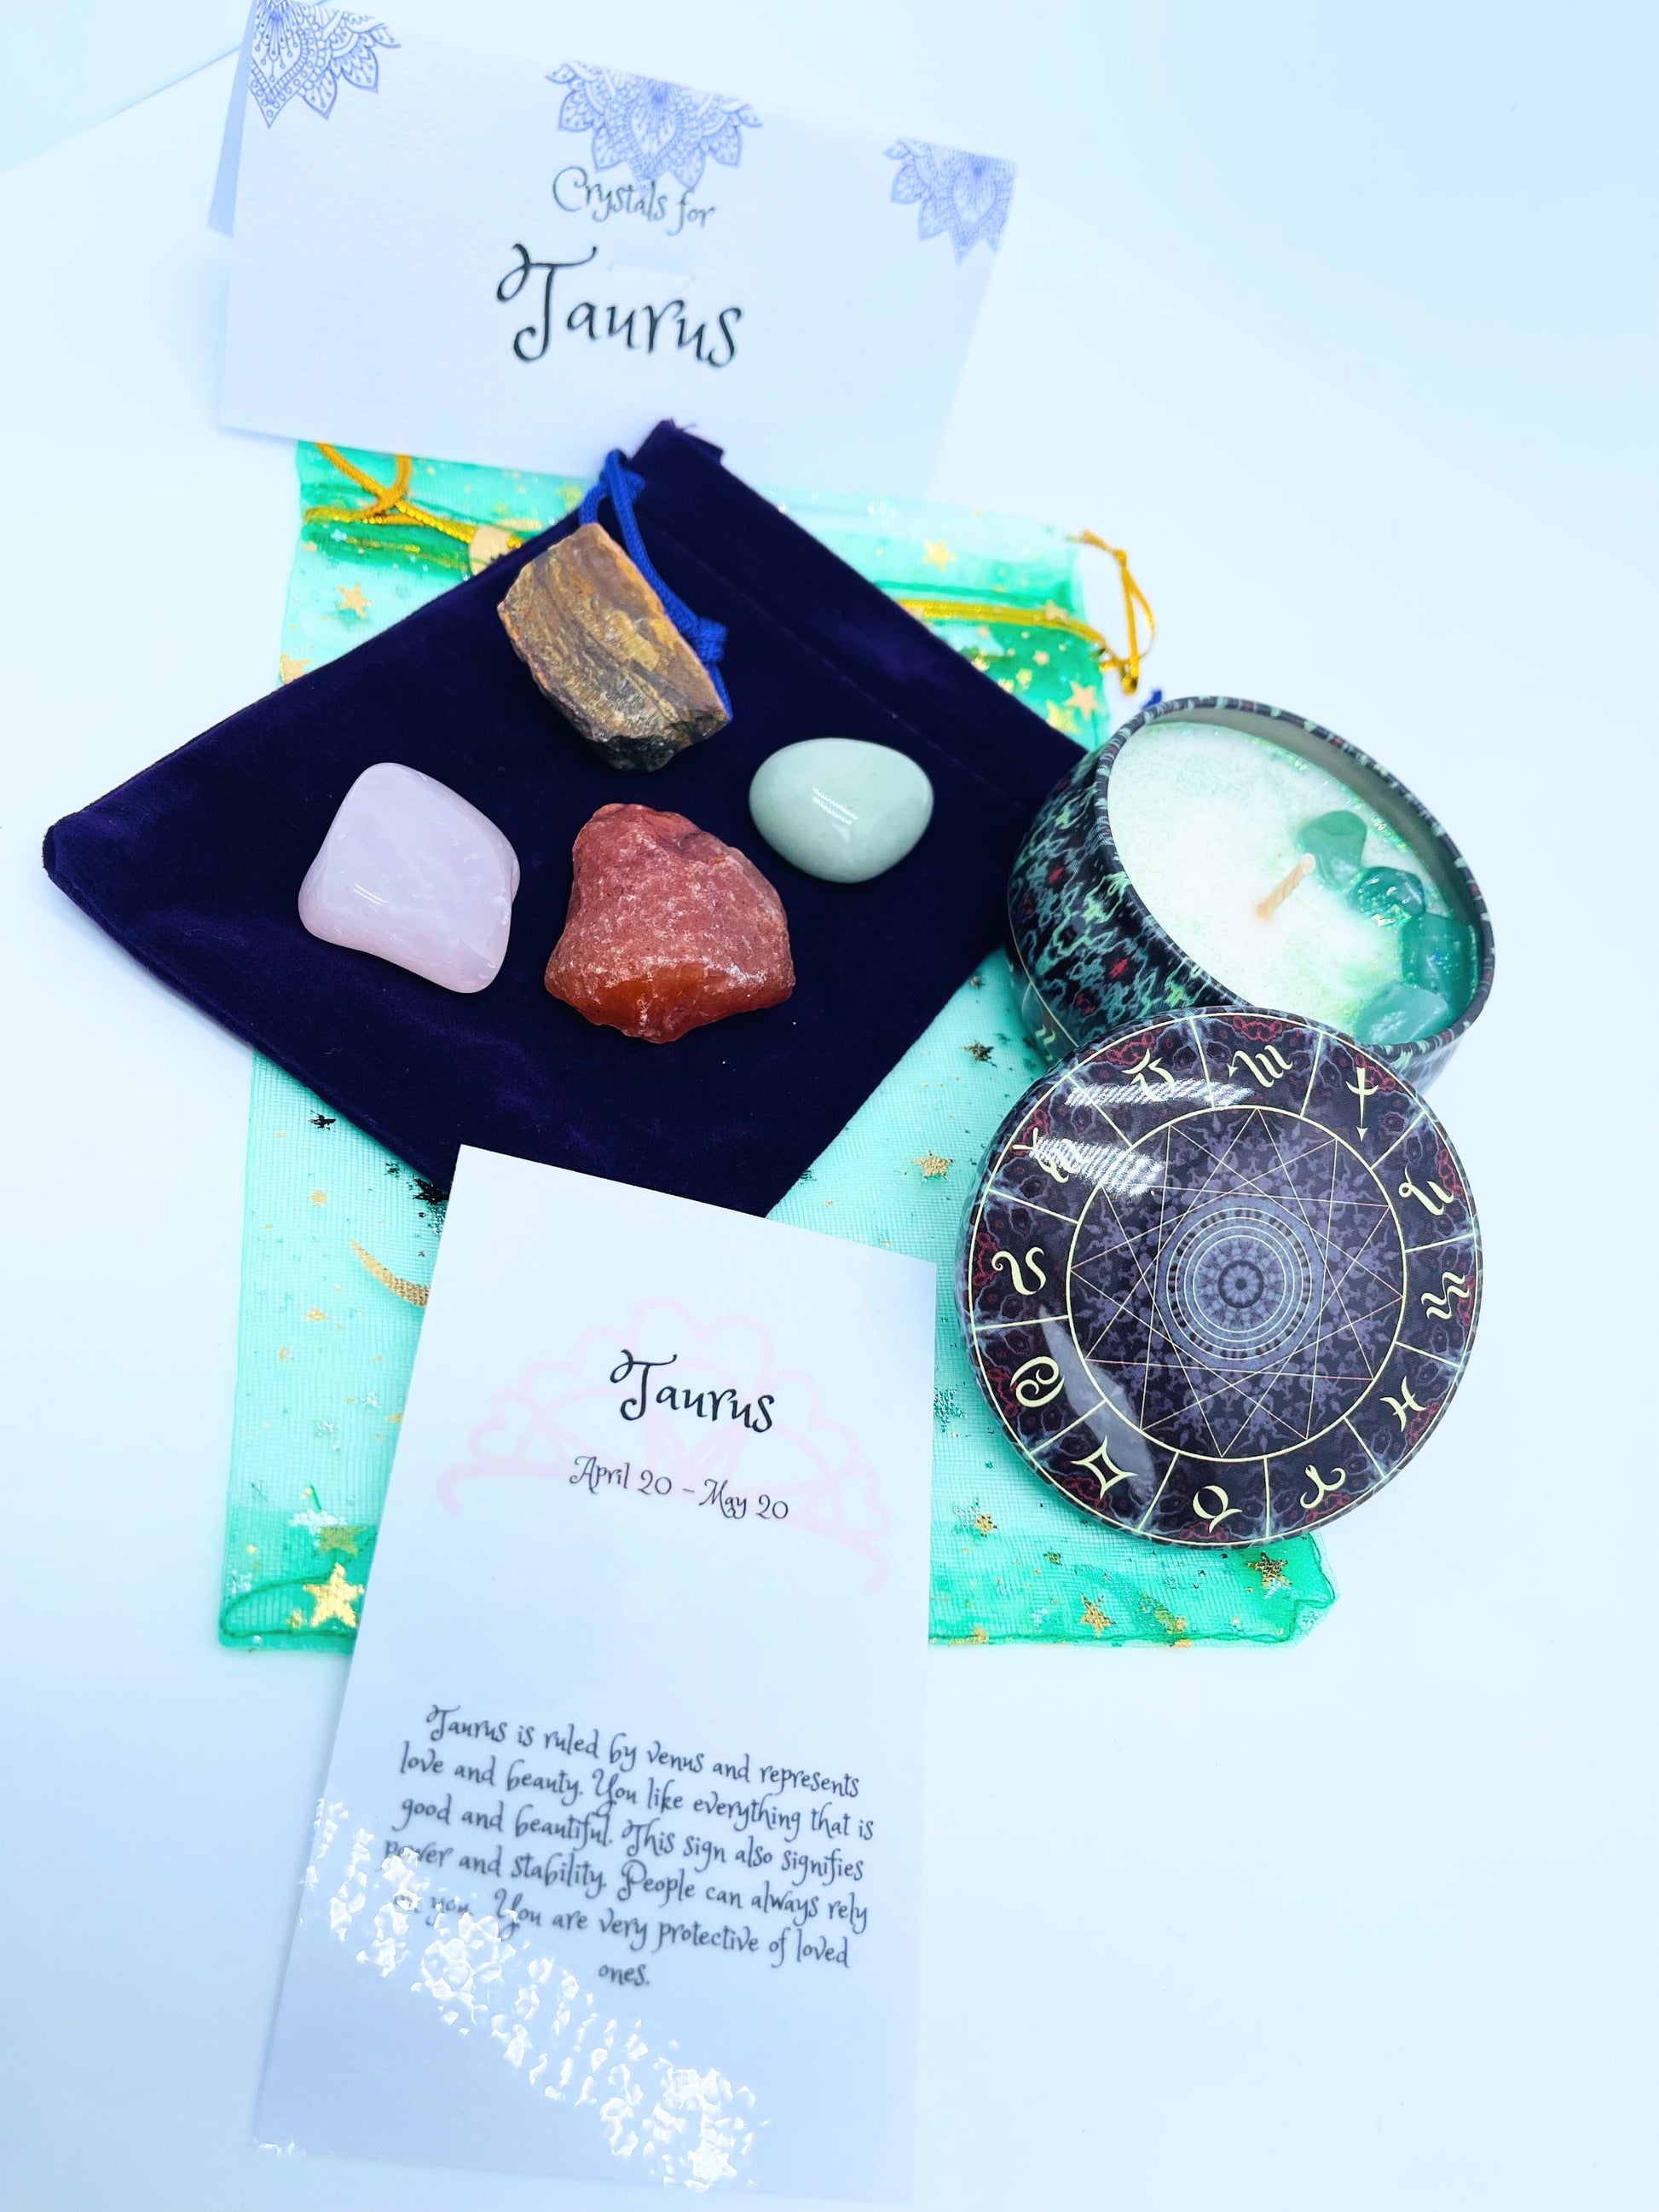 Taurus zodiac candle gift set with candle and four crystals for this sign sitting on a velvet bag.